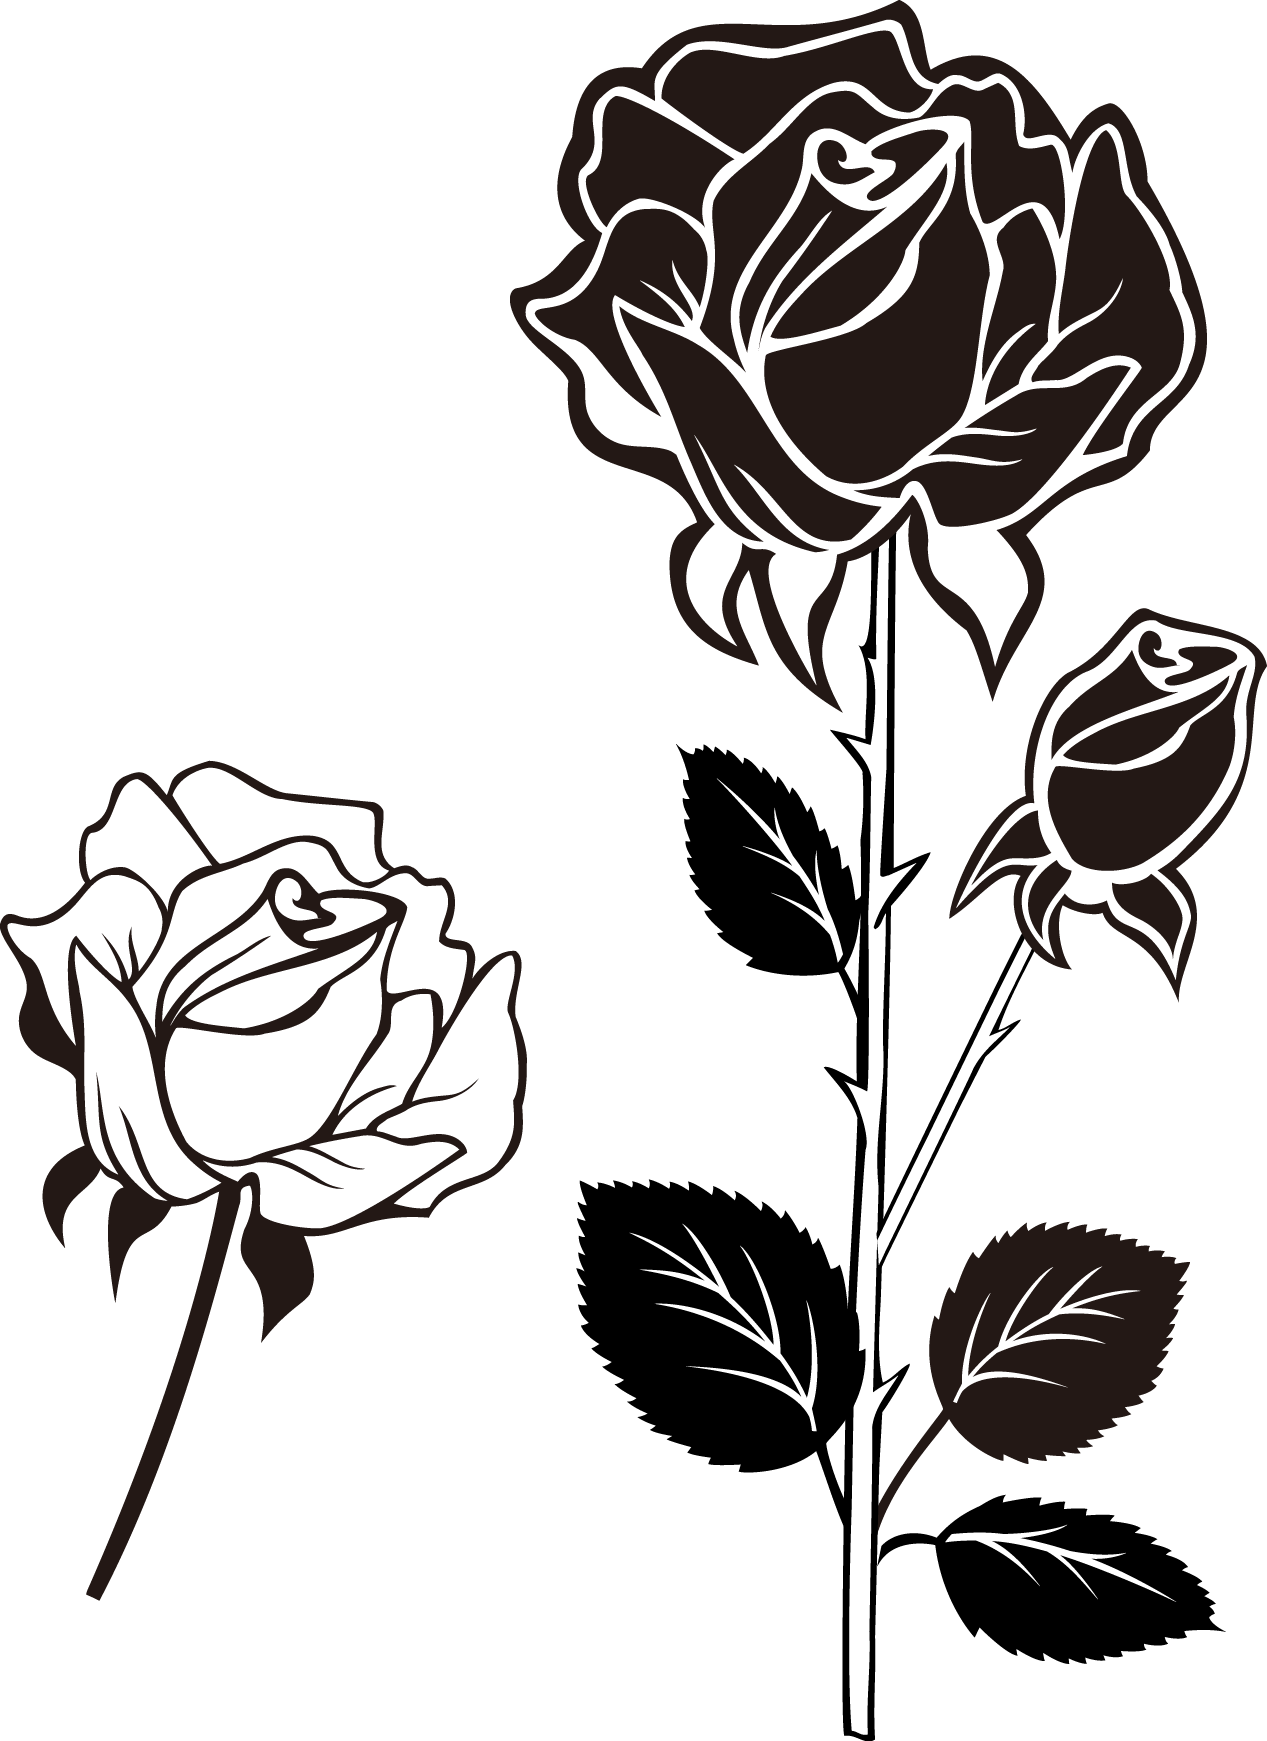 Stylized Blackand White Roses PNG